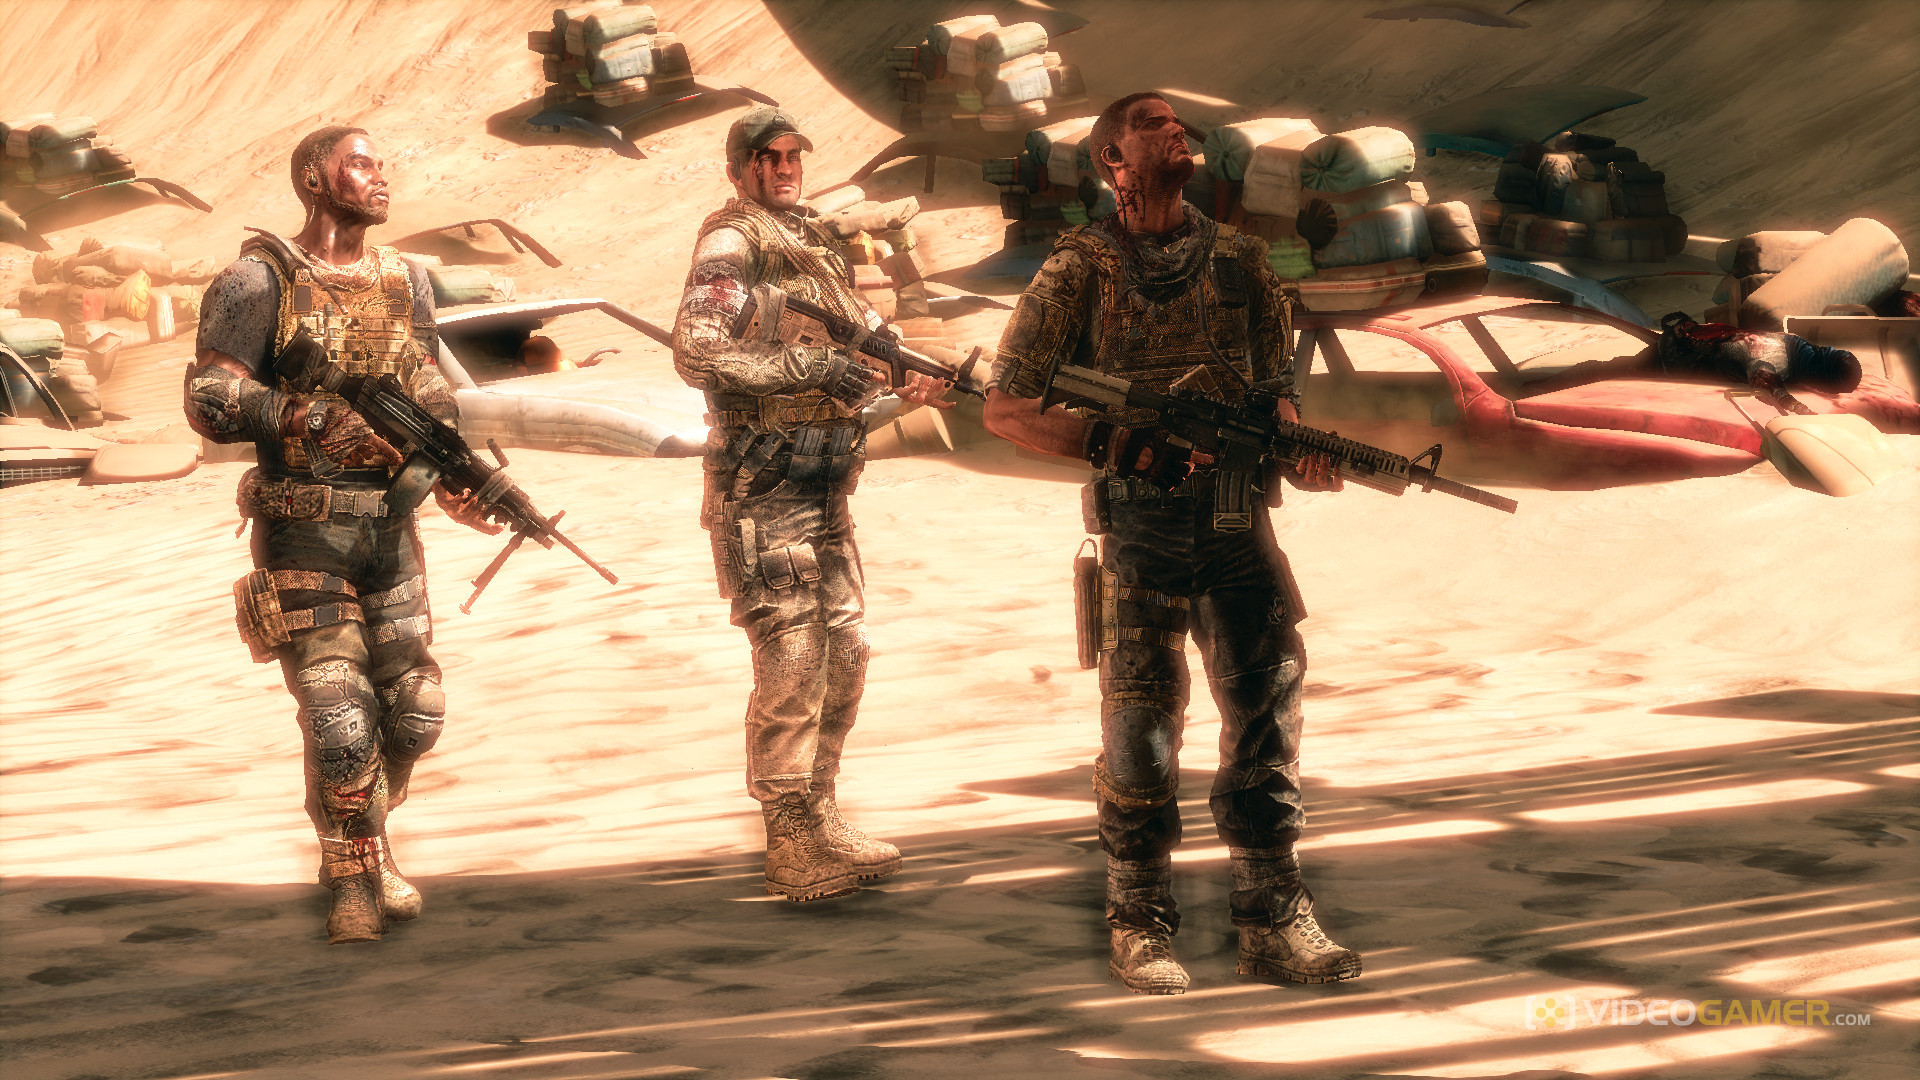 spec_ops_1_kep